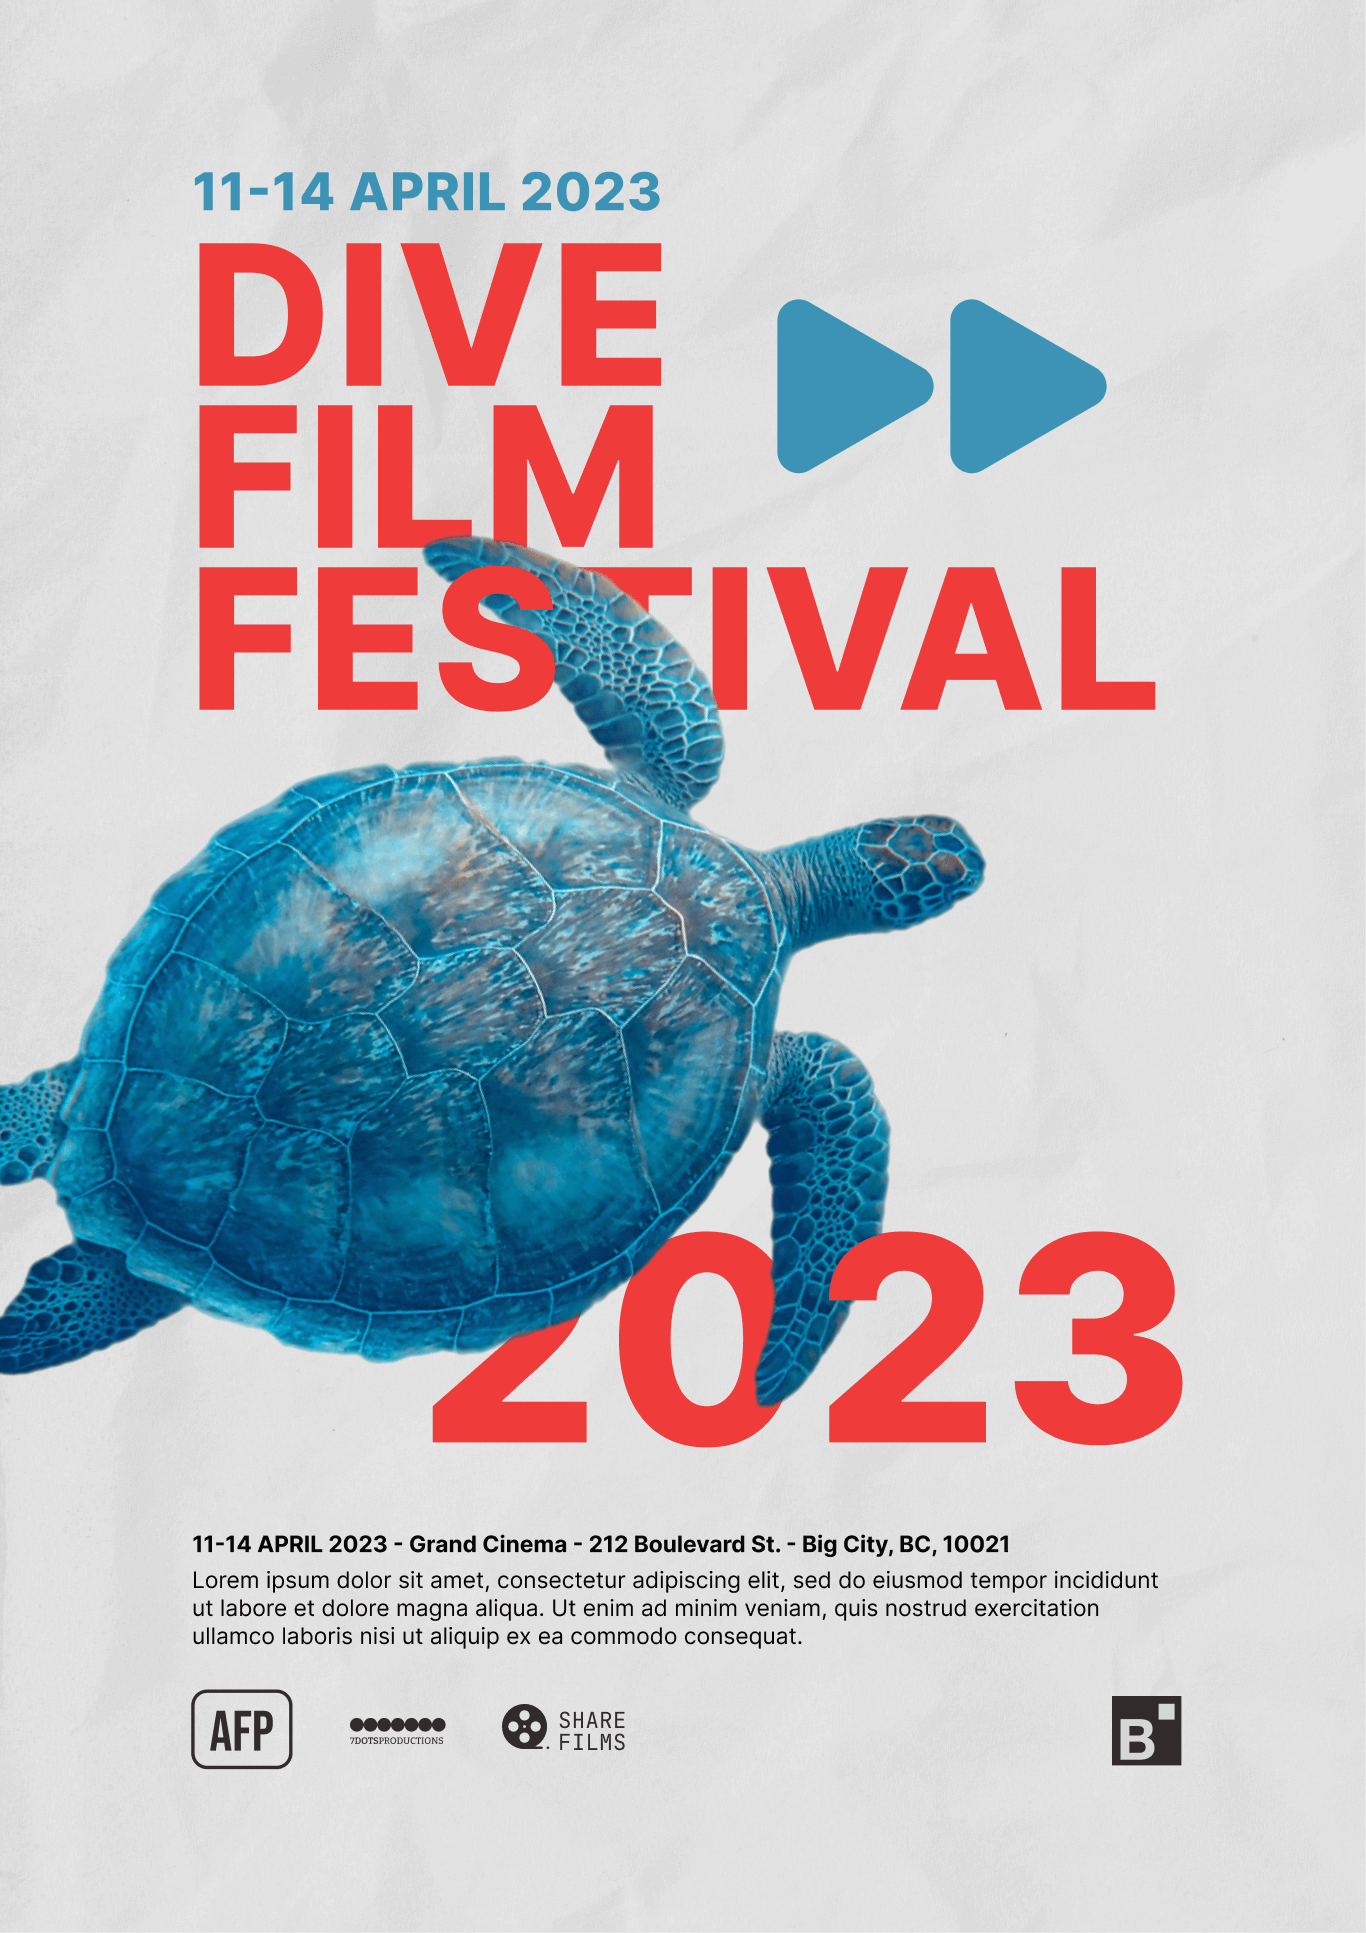  Poster for the Dive Film Festival, dated April 11-14, 2023, featuring a sea turtle